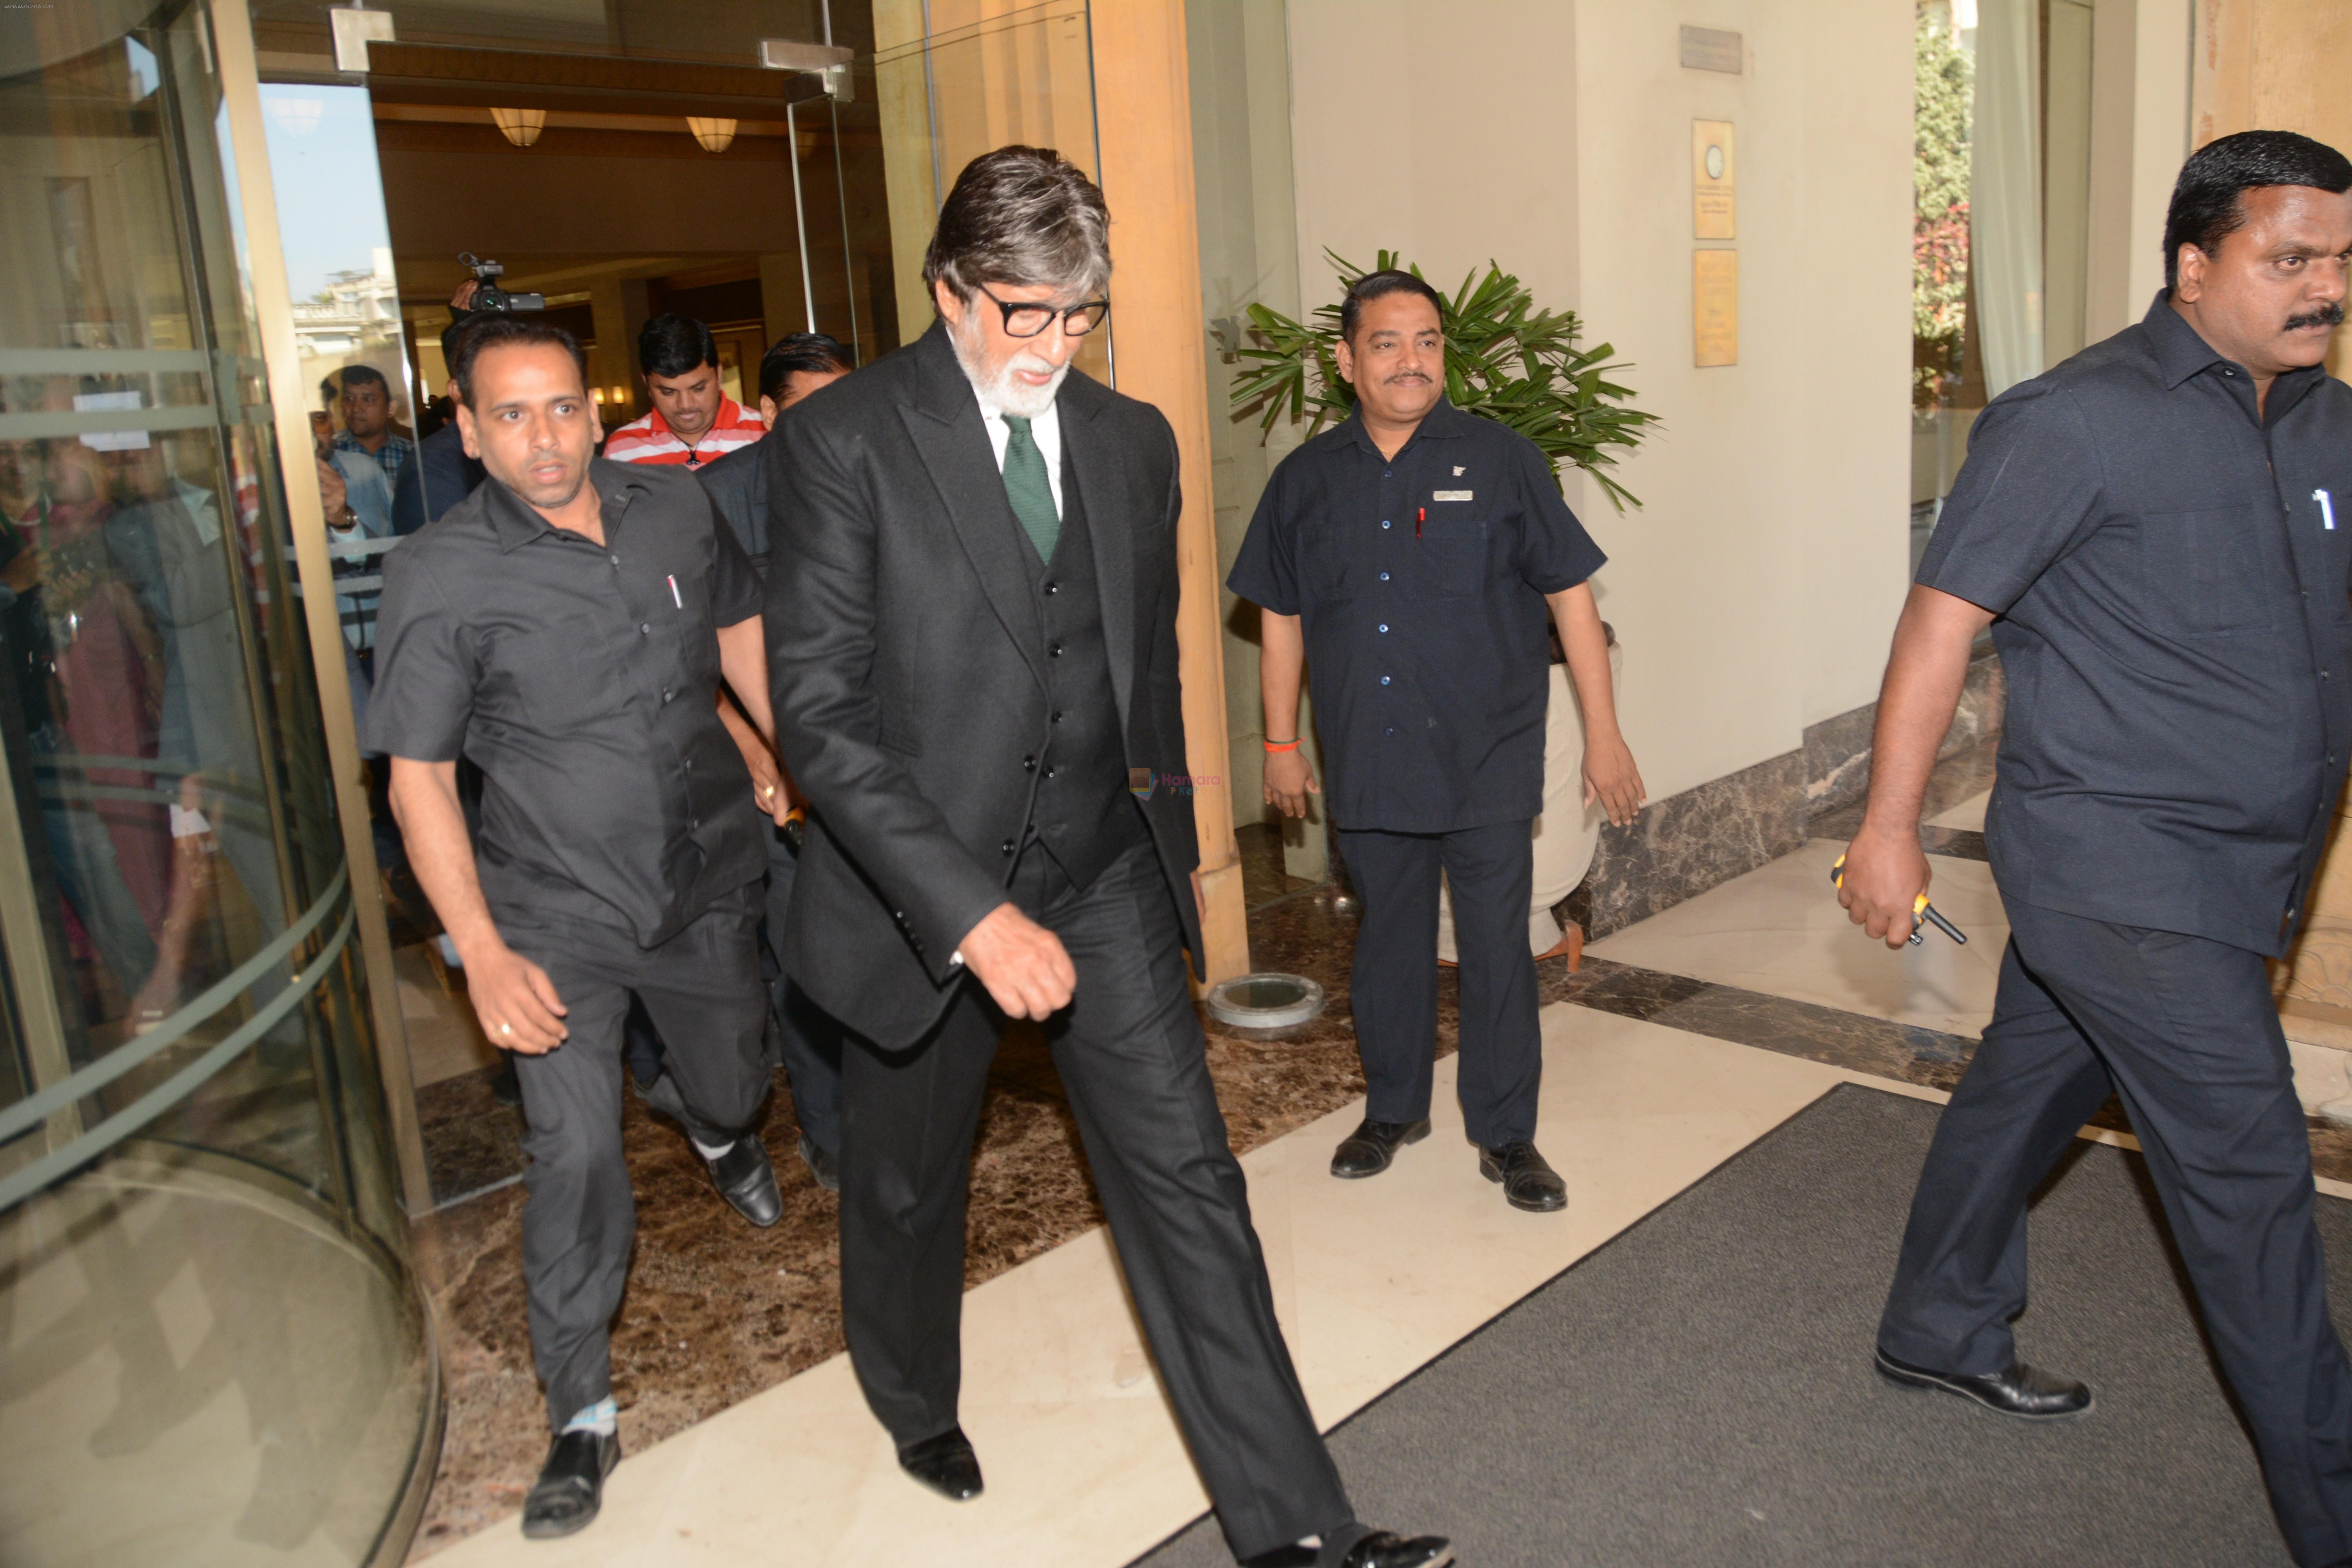 Amitabh Bachchan at the launch of National action plan on combating viral hepatitis in India on 25th Feb 2019